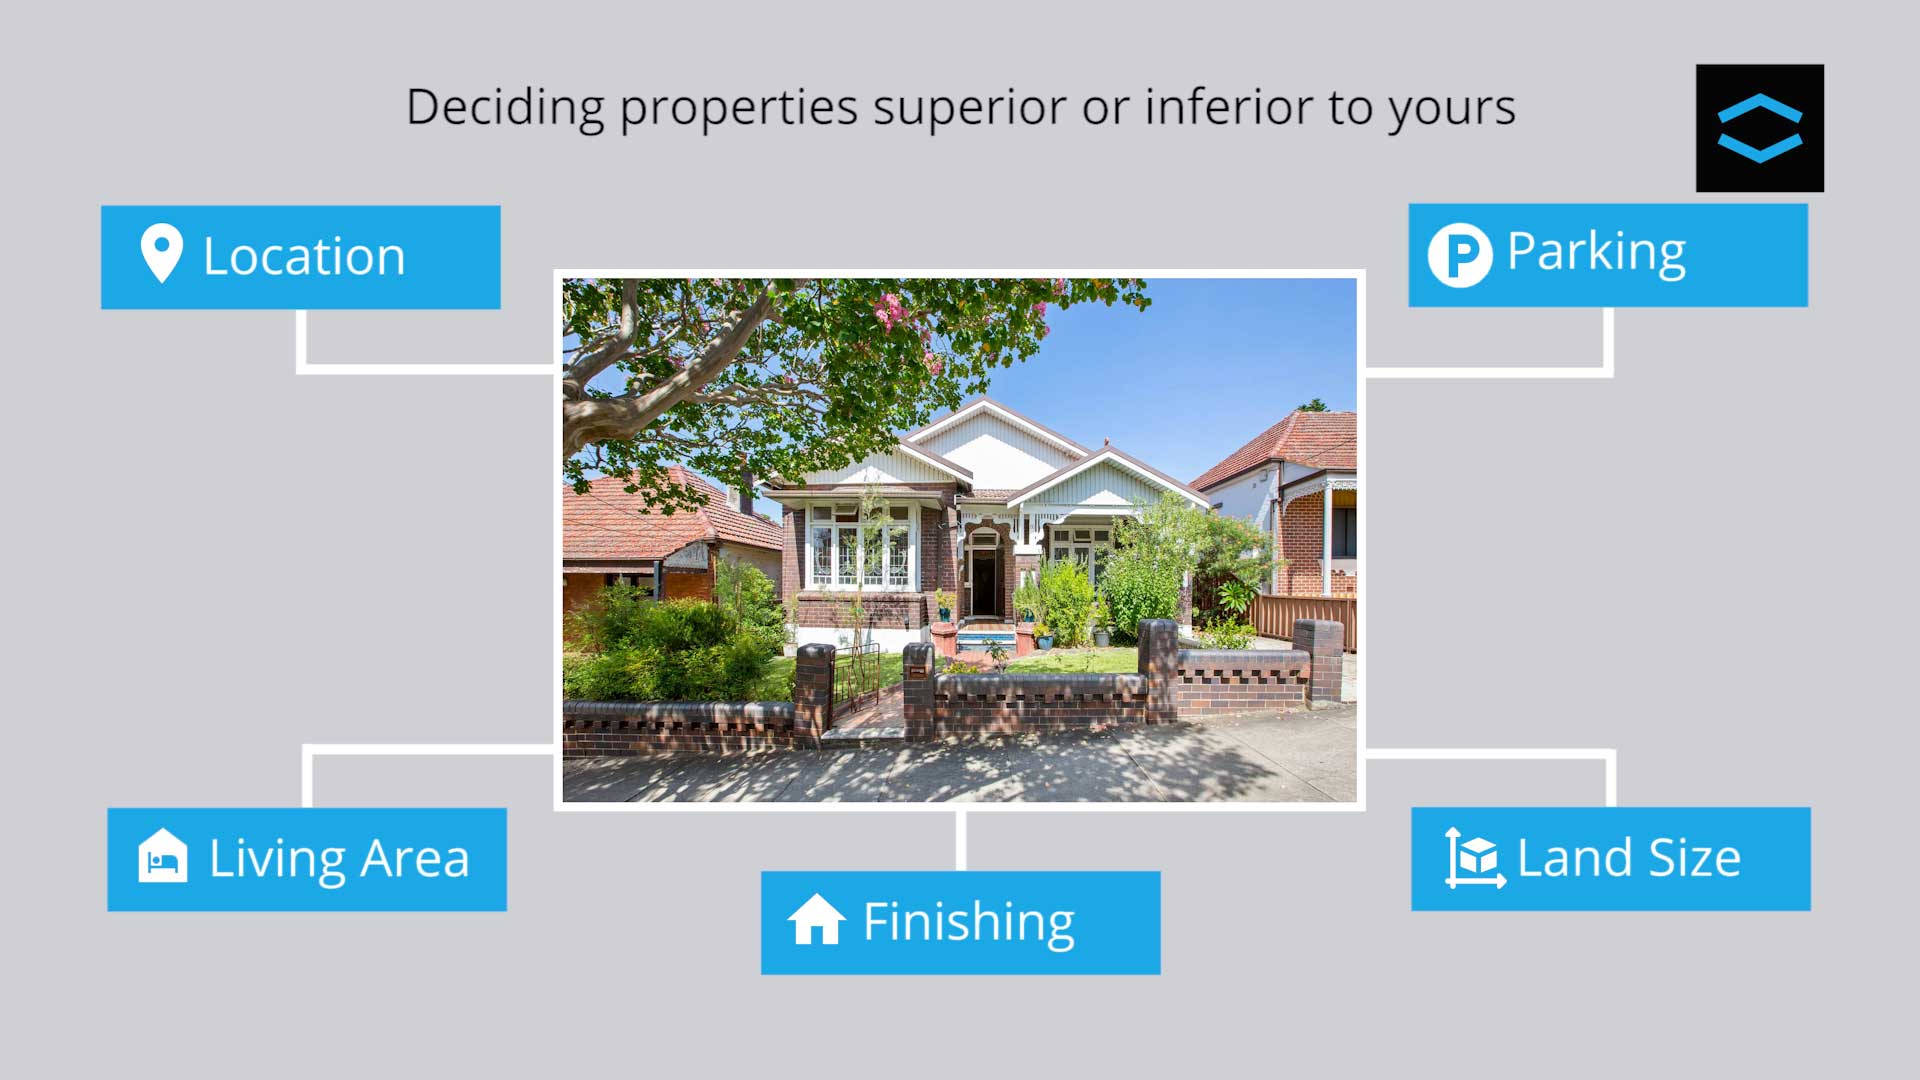 Factors to consider when determining properties superior or inferior to the one you're interested in